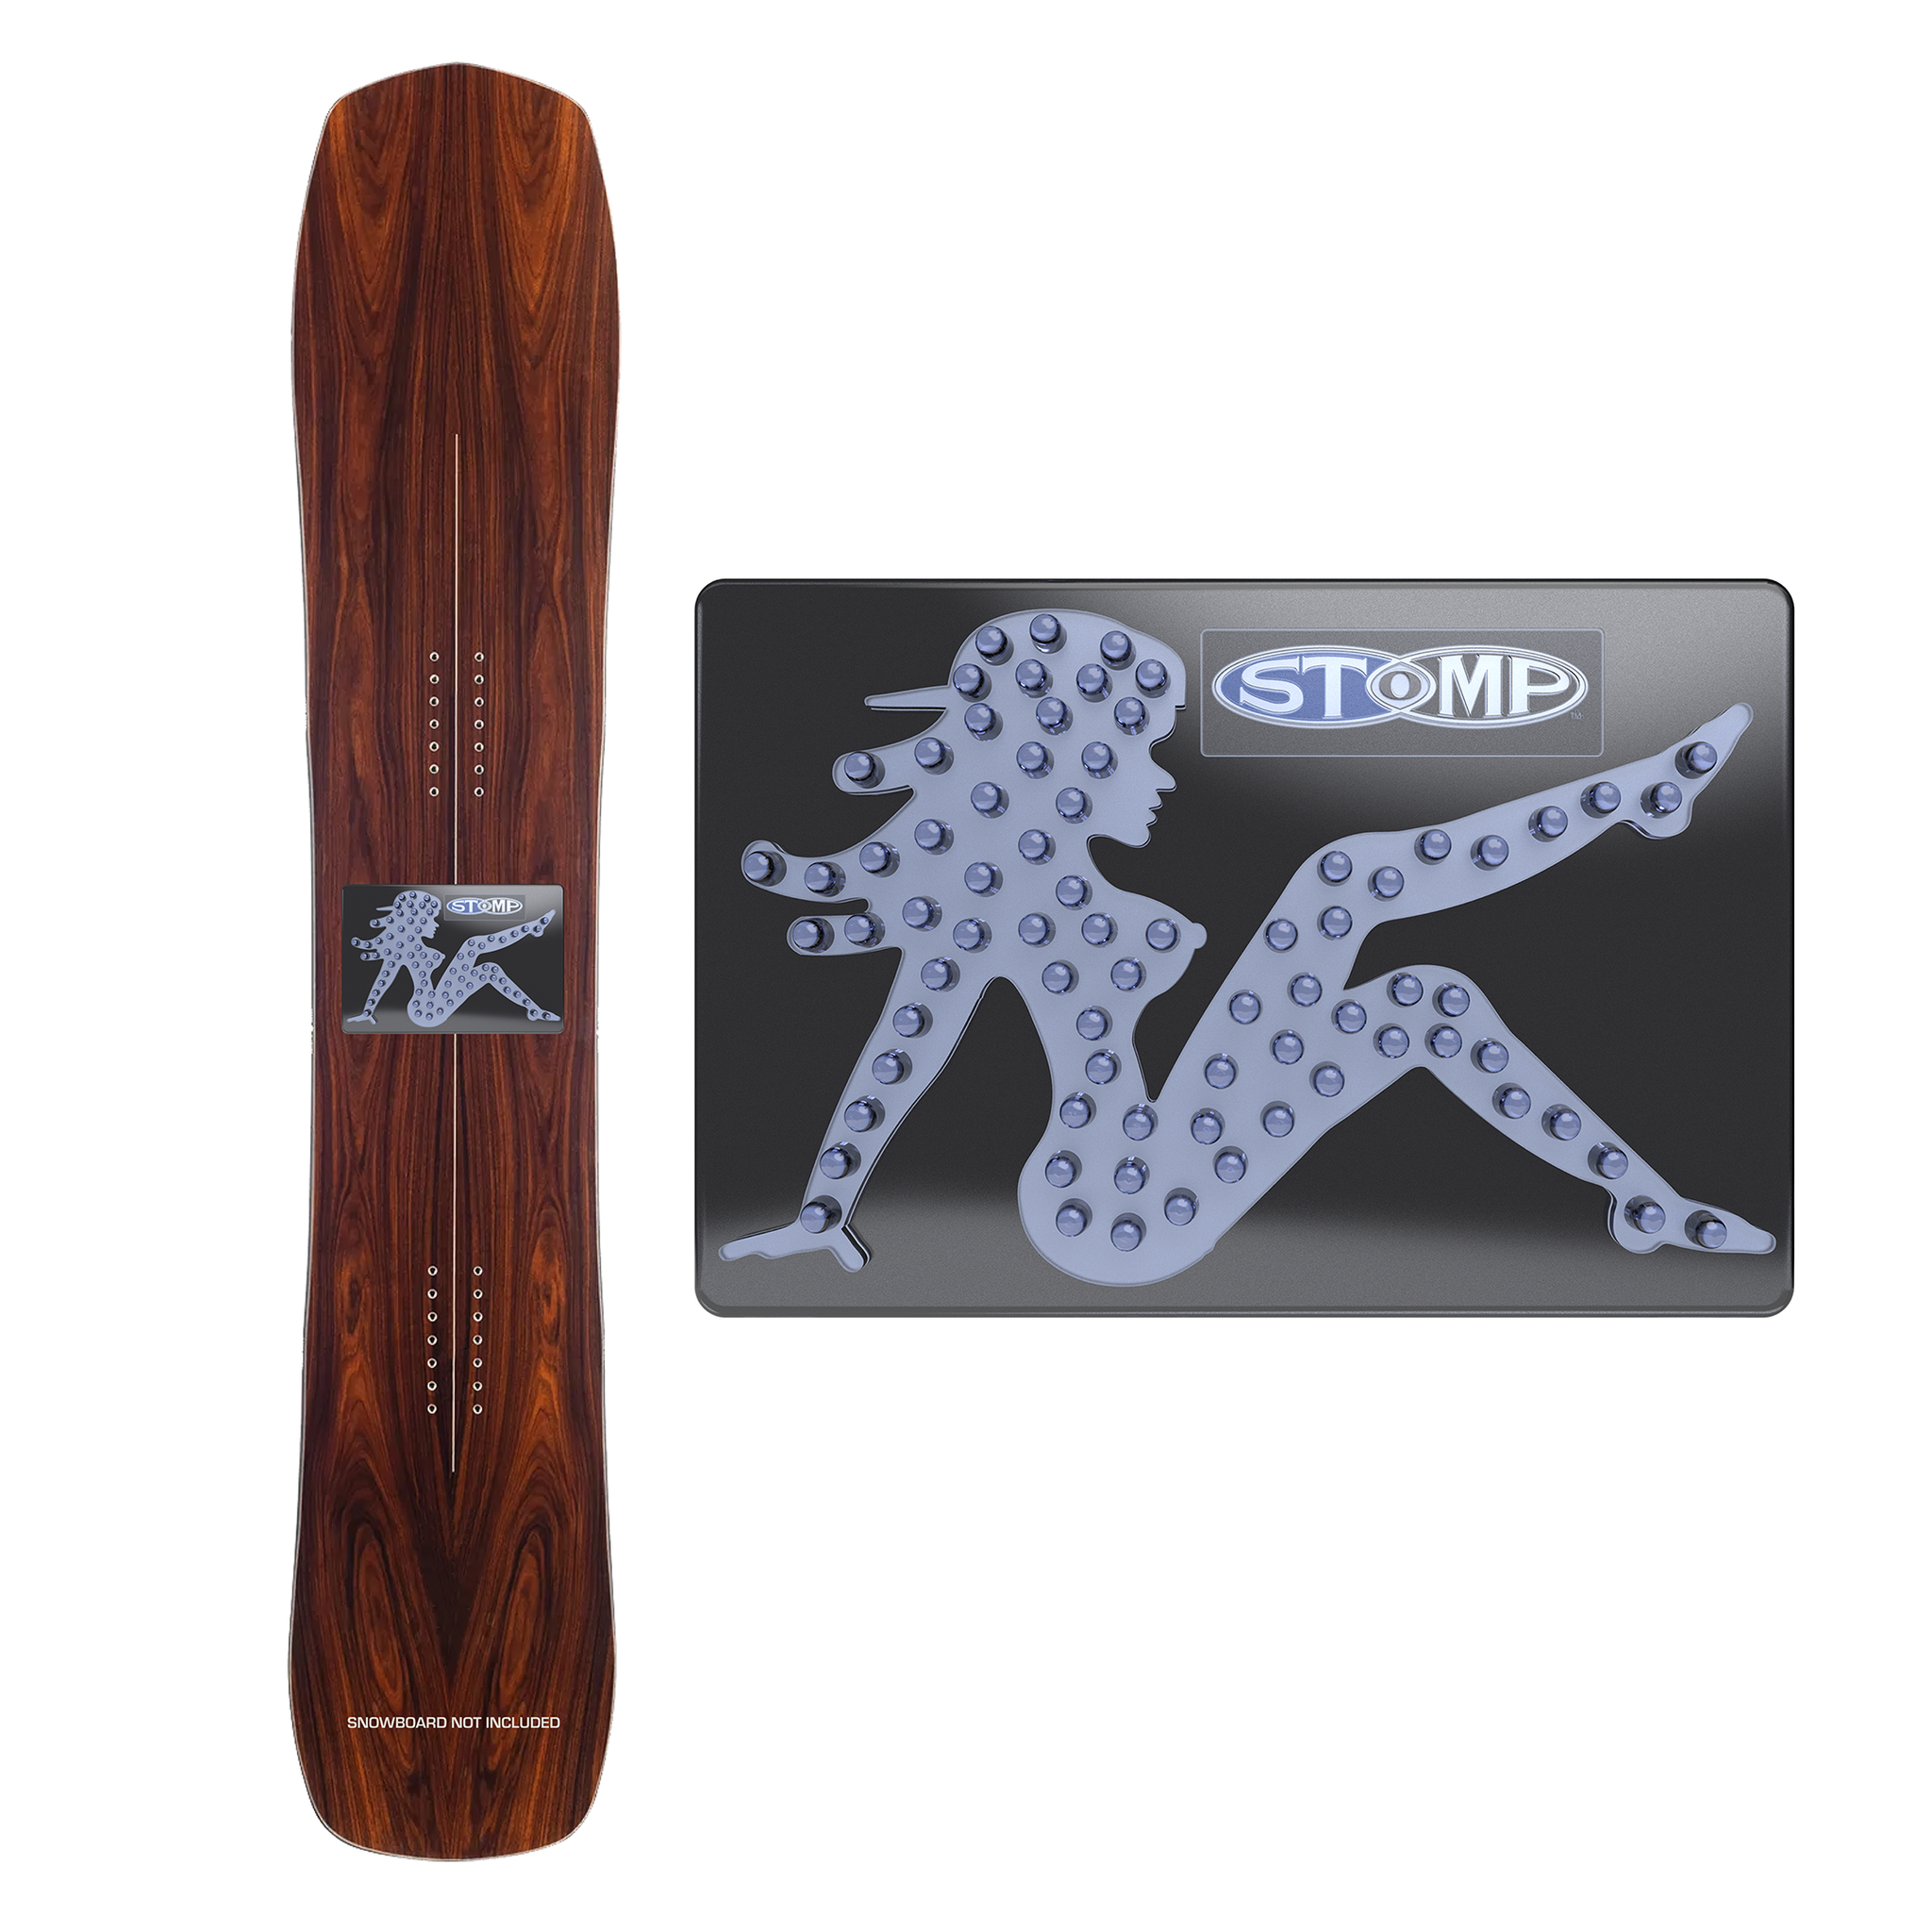 Mud Flap Stomp Pad : Old School Collection - Stompgrip